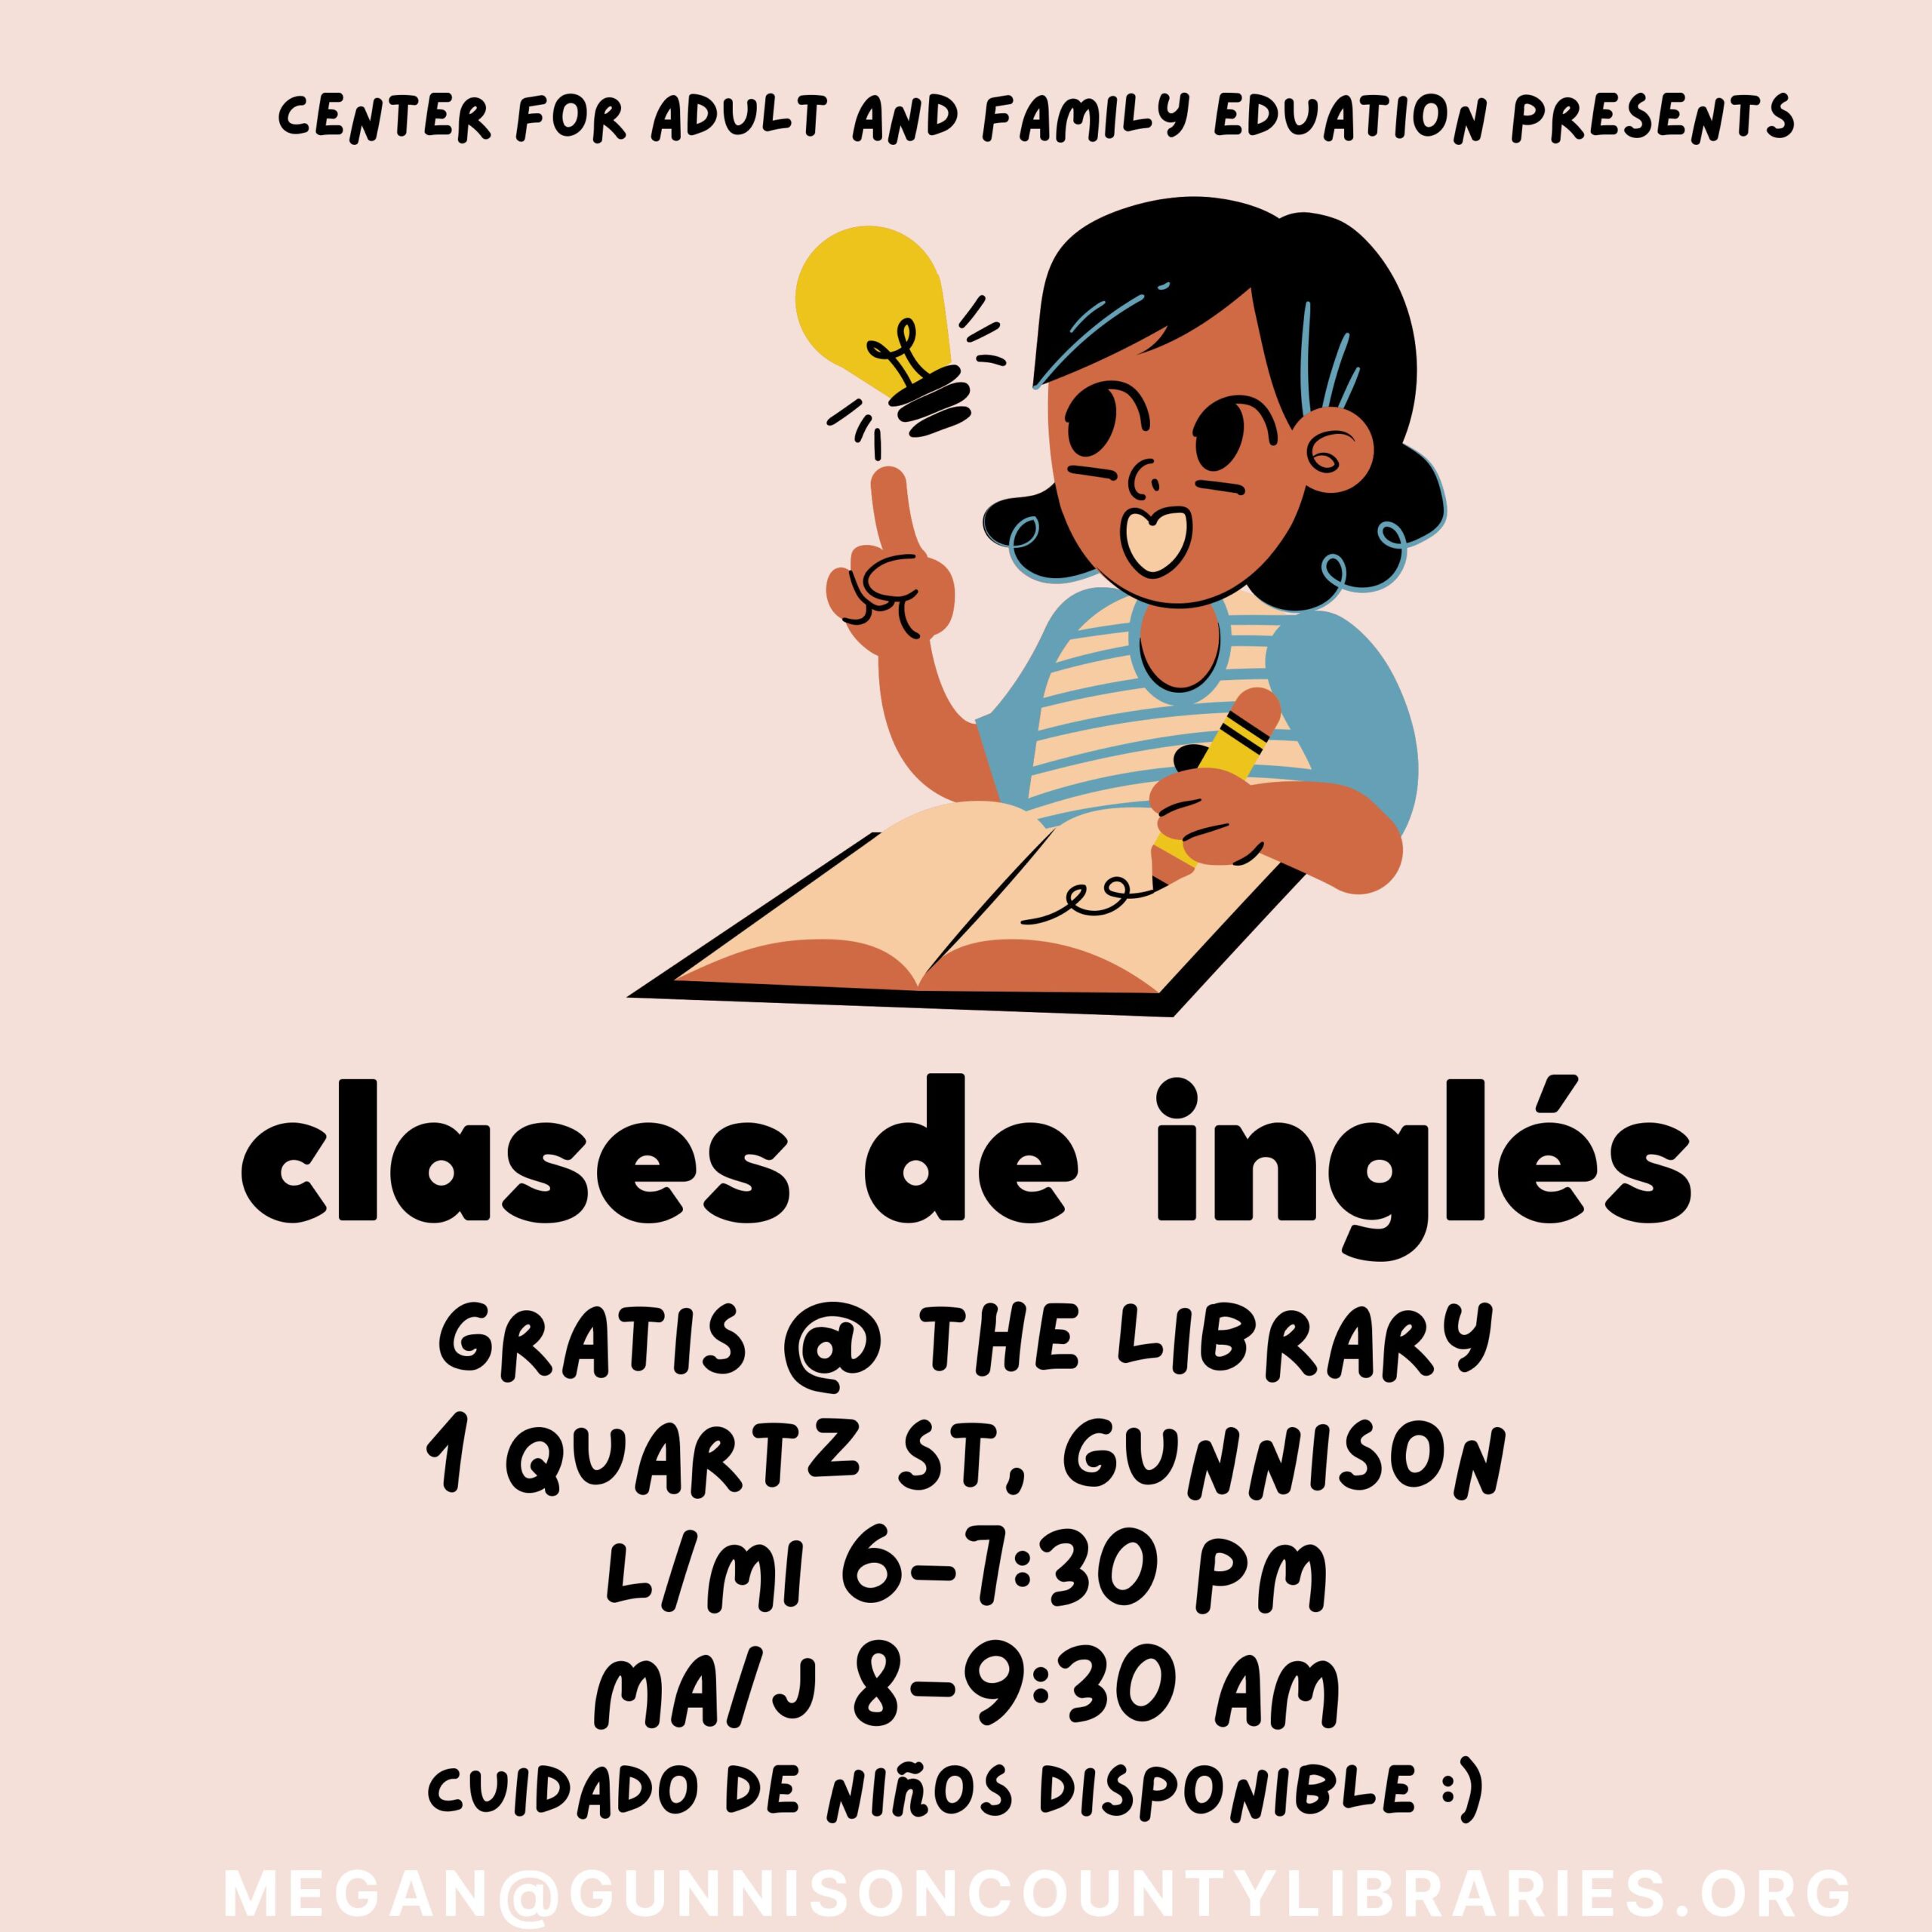 girl writing in notebook with lightbulb going off. Text: center for adult and family education presents clases de ingles. gratis @ the library. 1 quartz st, gunnison. L/MI 6-7:30 pm. MA/J 8-9:30 AM. Cuidado de nonos disponible. megan@gunnisoncountylibraries.org